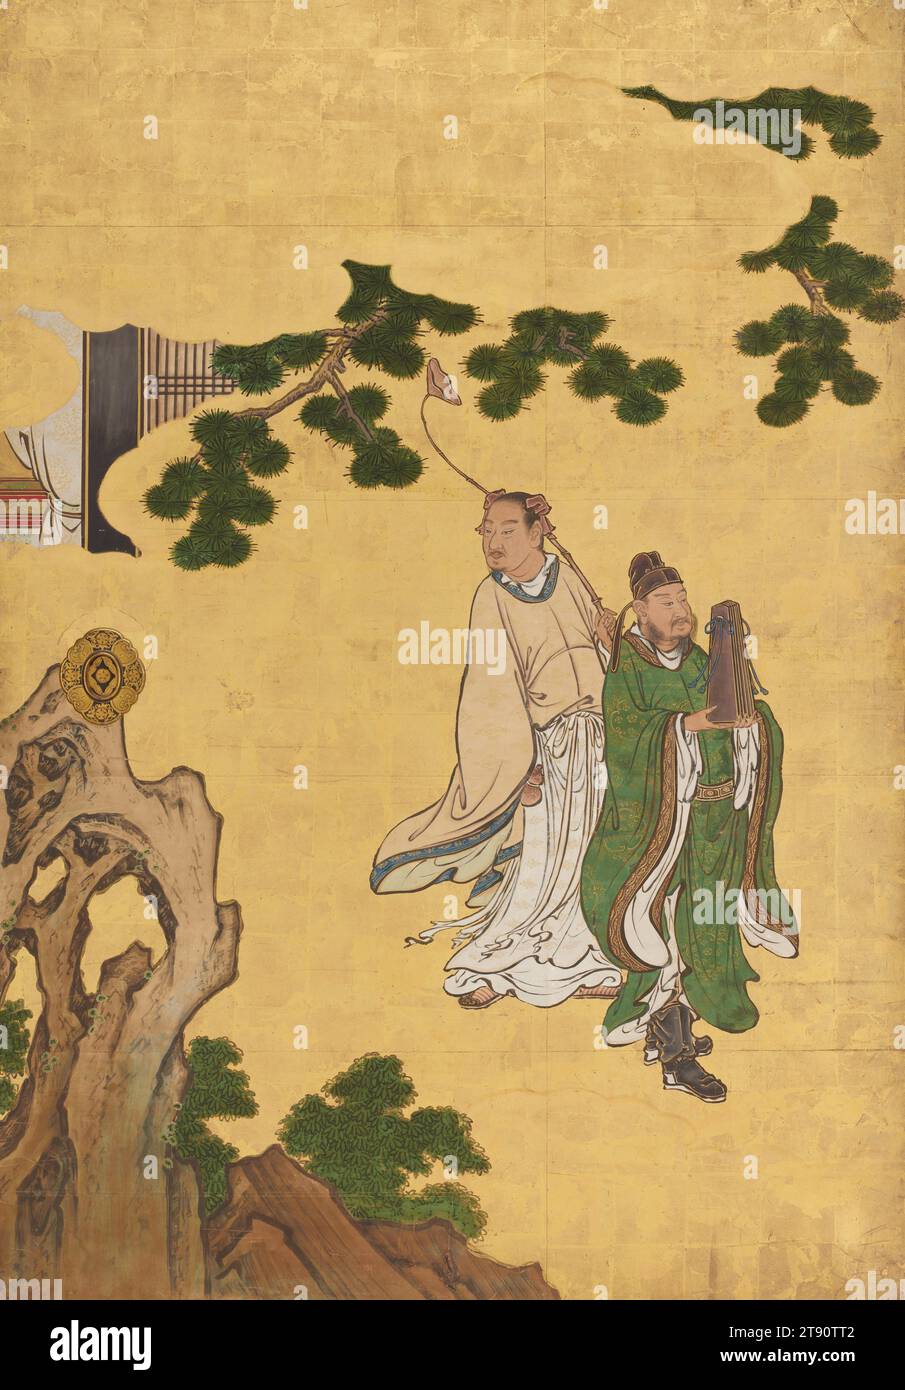 Cao Guojiu (left) and Lan Caihe (right) left of the set Daoist Immortals, 1646, Kano Sansetsu, Japanese, 1589 - 1651, 65 1/2 x 45 1/2 in. (166.37 x 115.57 cm) (image)69 x 49 x 1 3/4 in. (175.26 x 124.46 x 4.45 cm) (outer frame), Ink, color, and gold leaf on paper, Japan, 17th century, These sliding door panels (fusuma) show a group of Chinese Daoist immortals. The Chinese believed the immortals were historical and legendary personages who, through moral virtue, faith, and discipline, managed to transcend the bounds of the natural world and live forever. They were worshiped as saints. Stock Photo